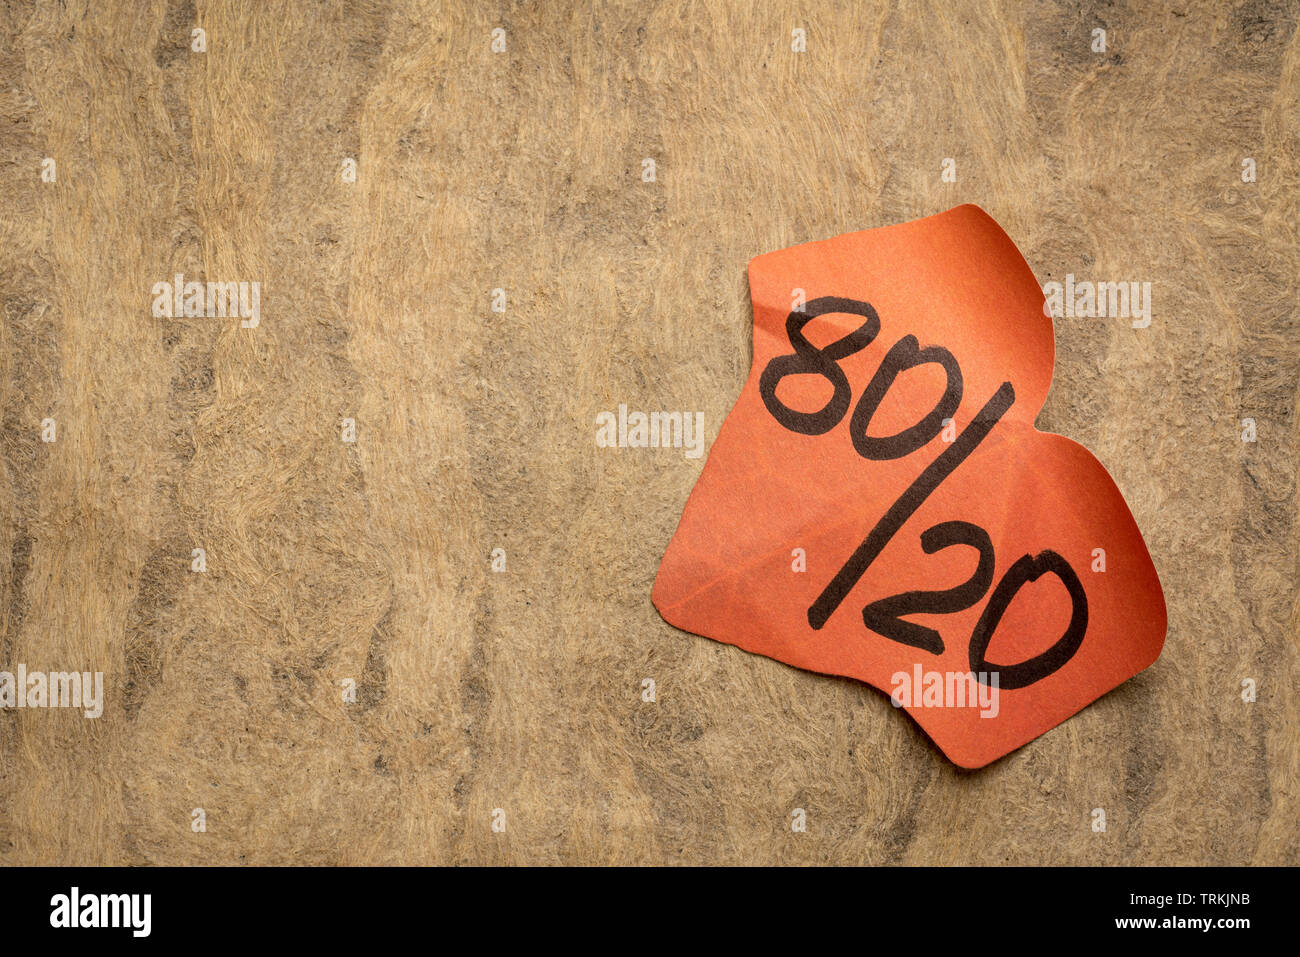 Pareto principle or eighty-twenty rule - leaf shaped sticky note against textured paper - a reminder or advice Stock Photo